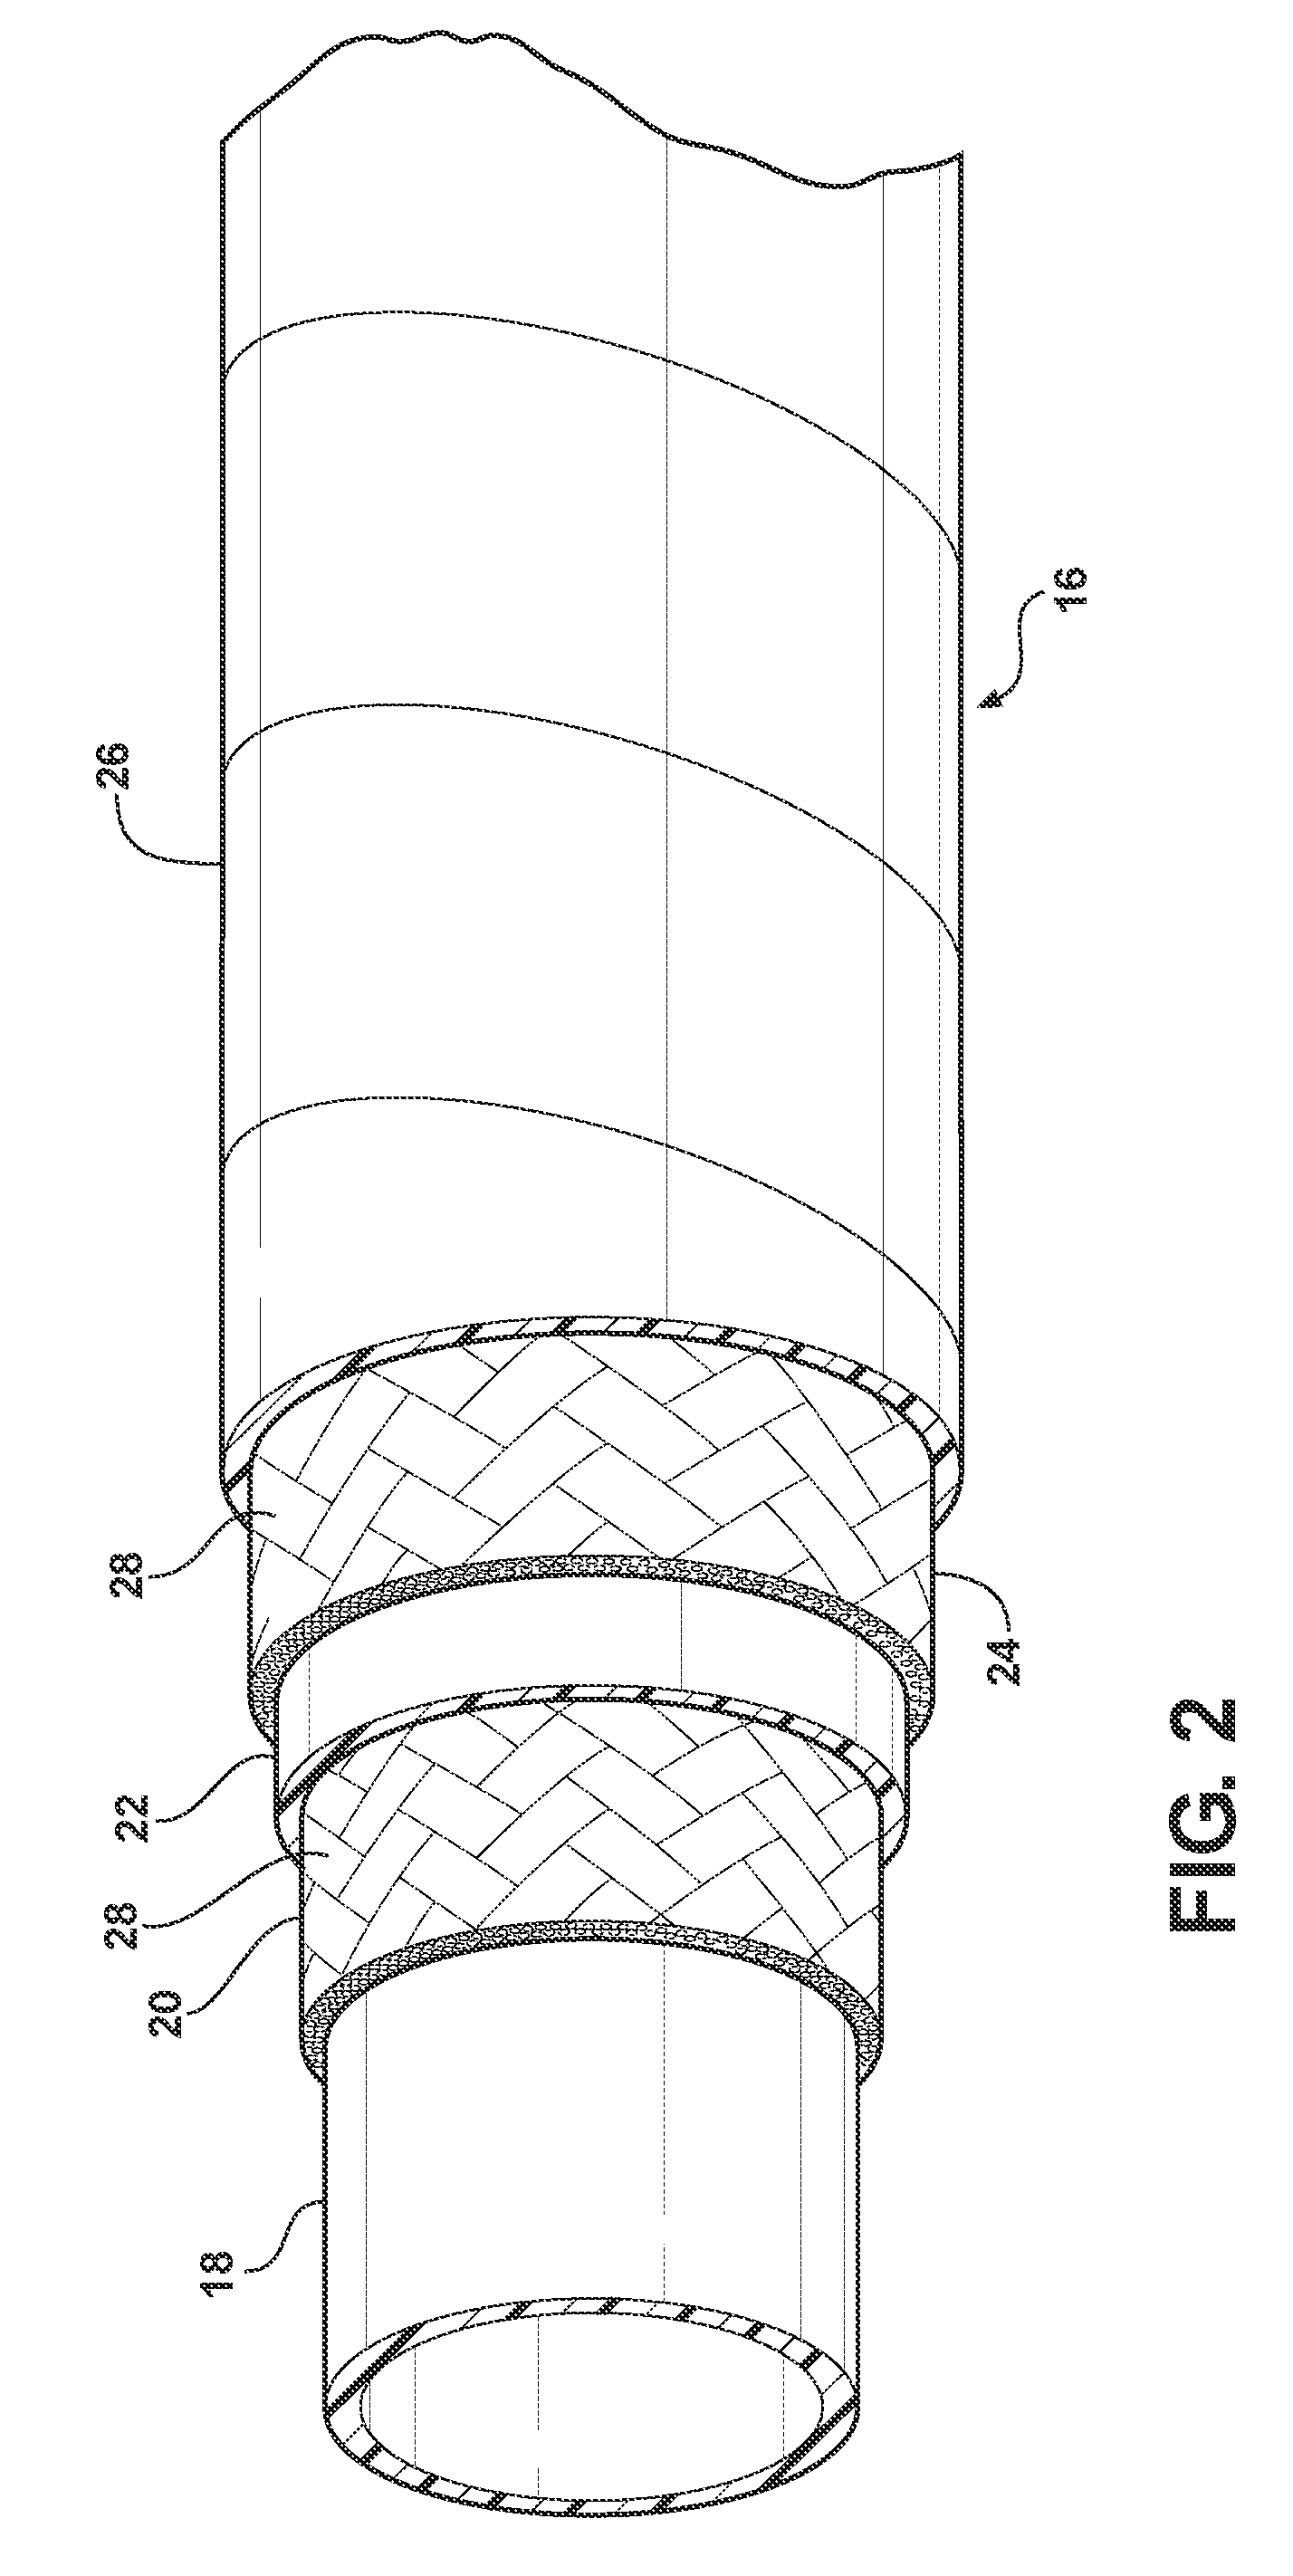 Degradation detection system for a hose assembly